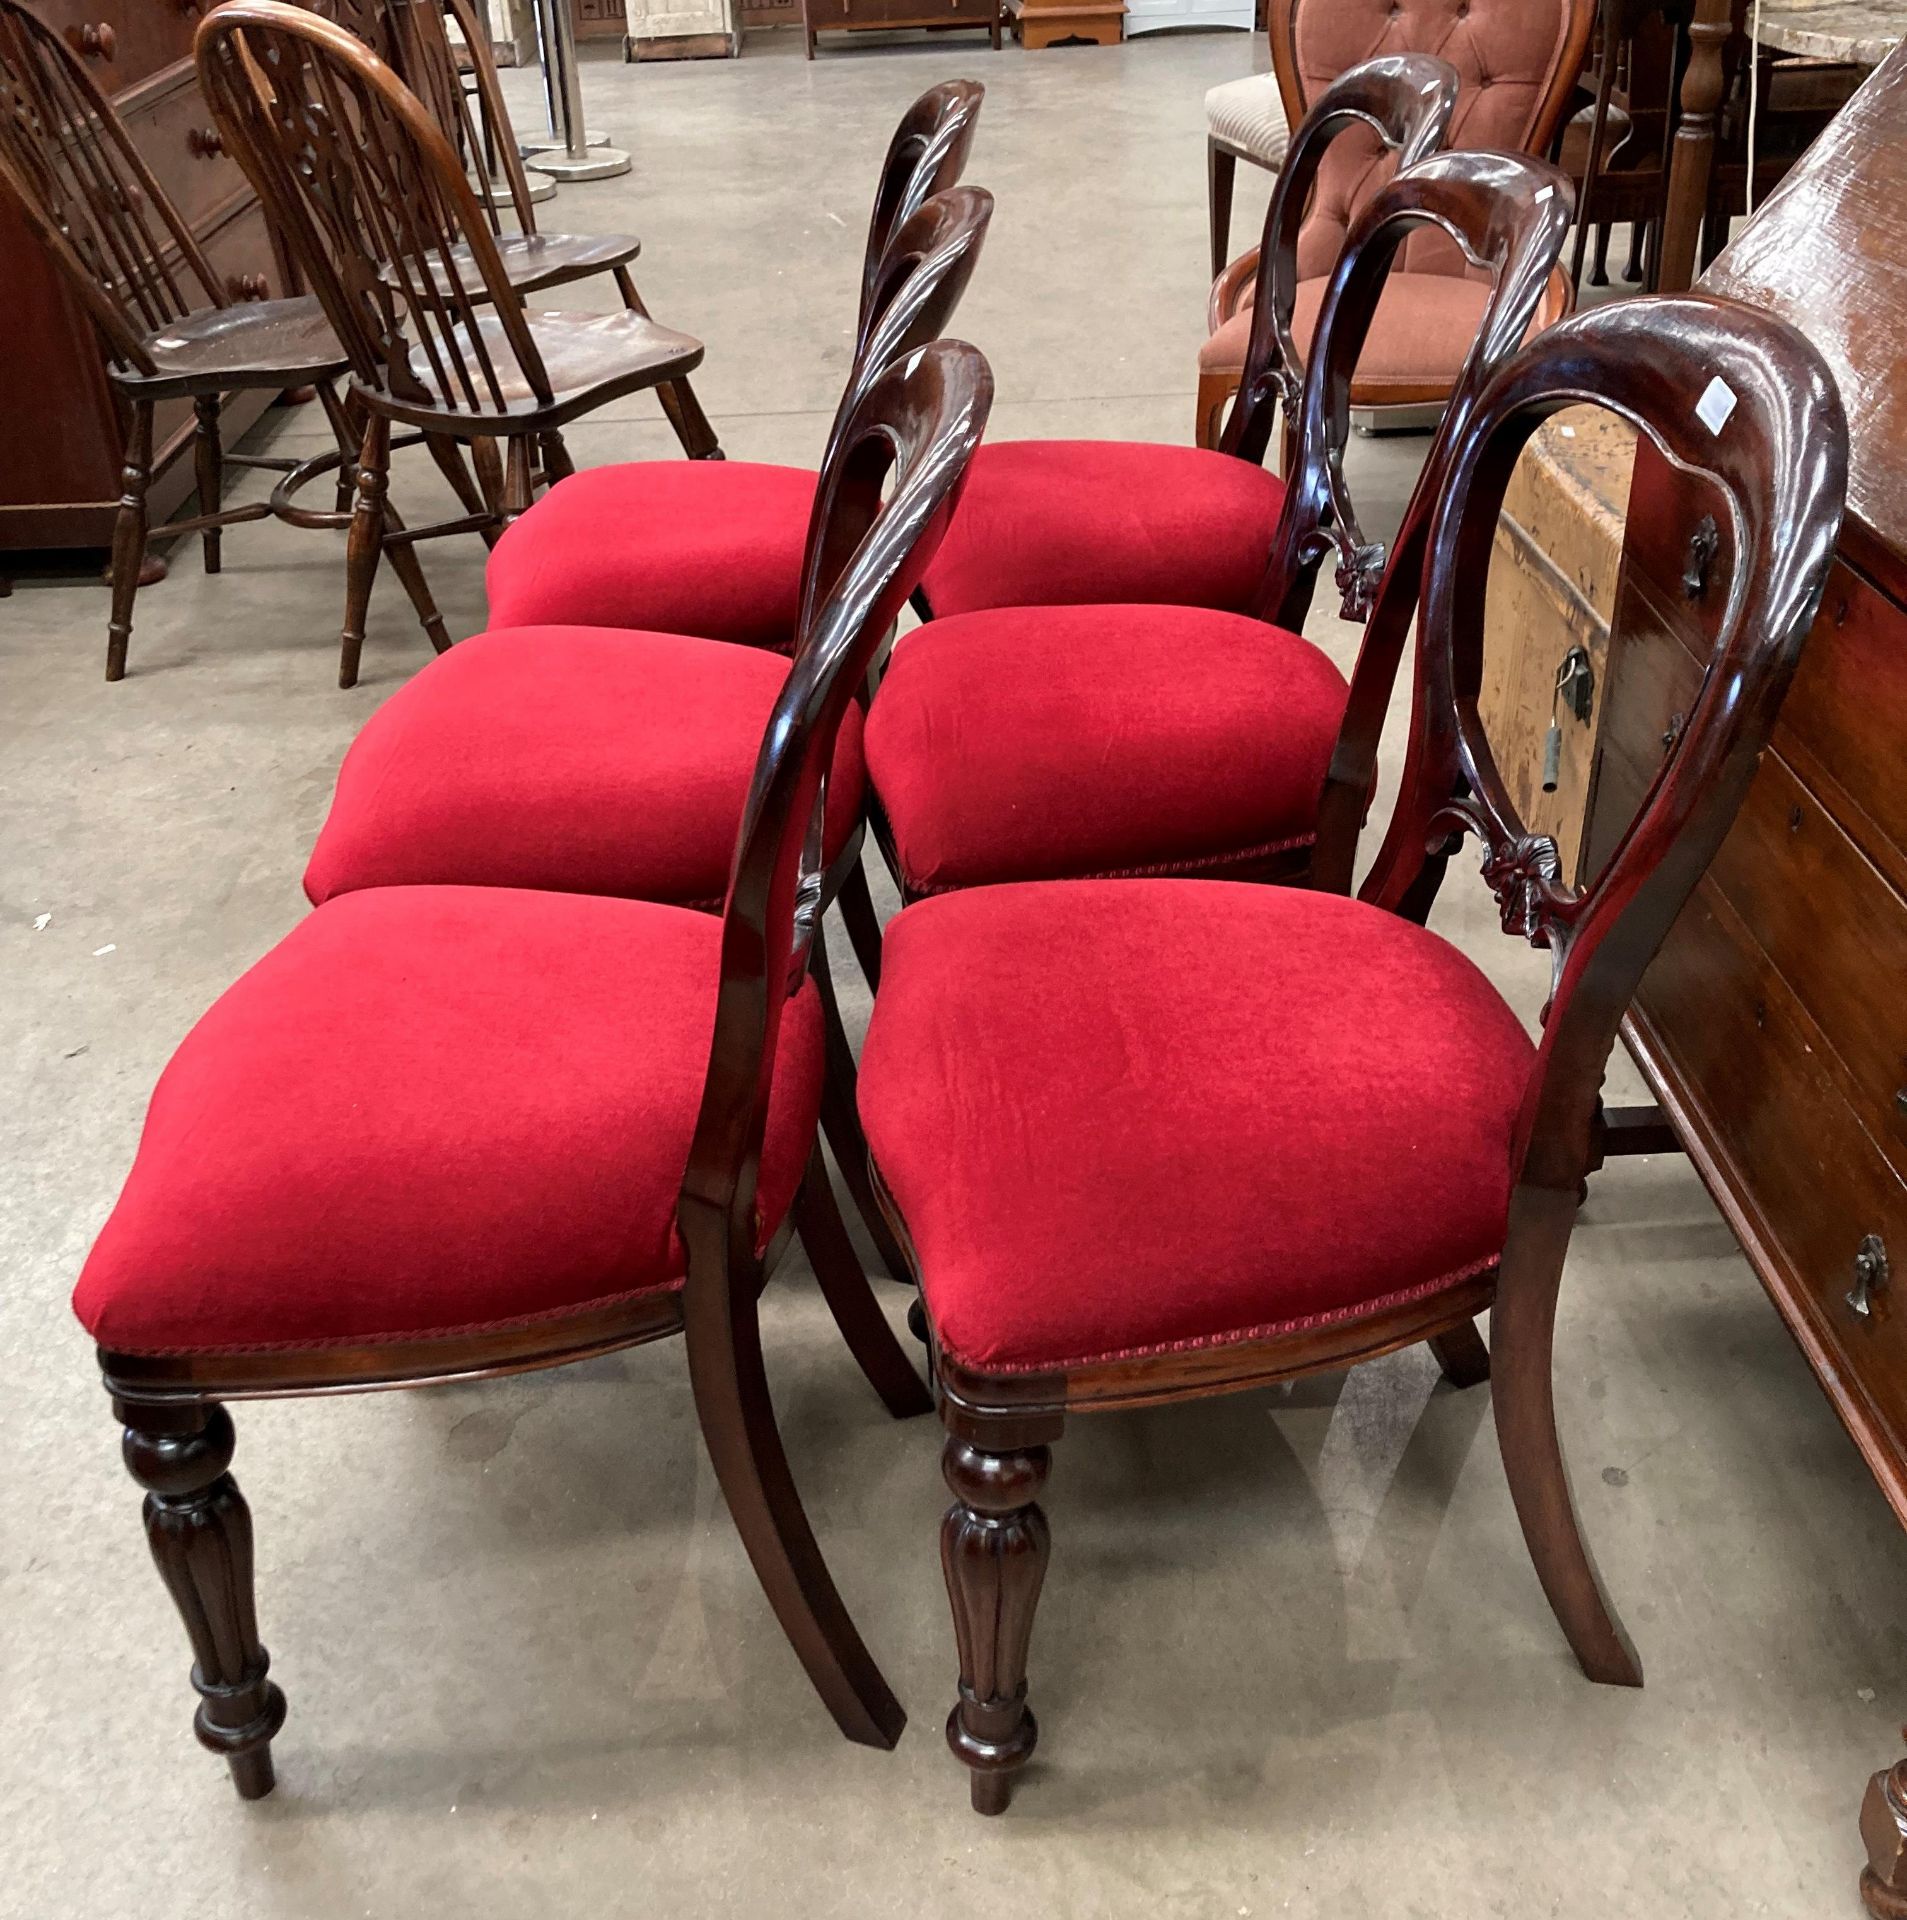 A set of six Victorian style balloon back dining chairs with red dralon upholstered seats (MS) - Image 2 of 3